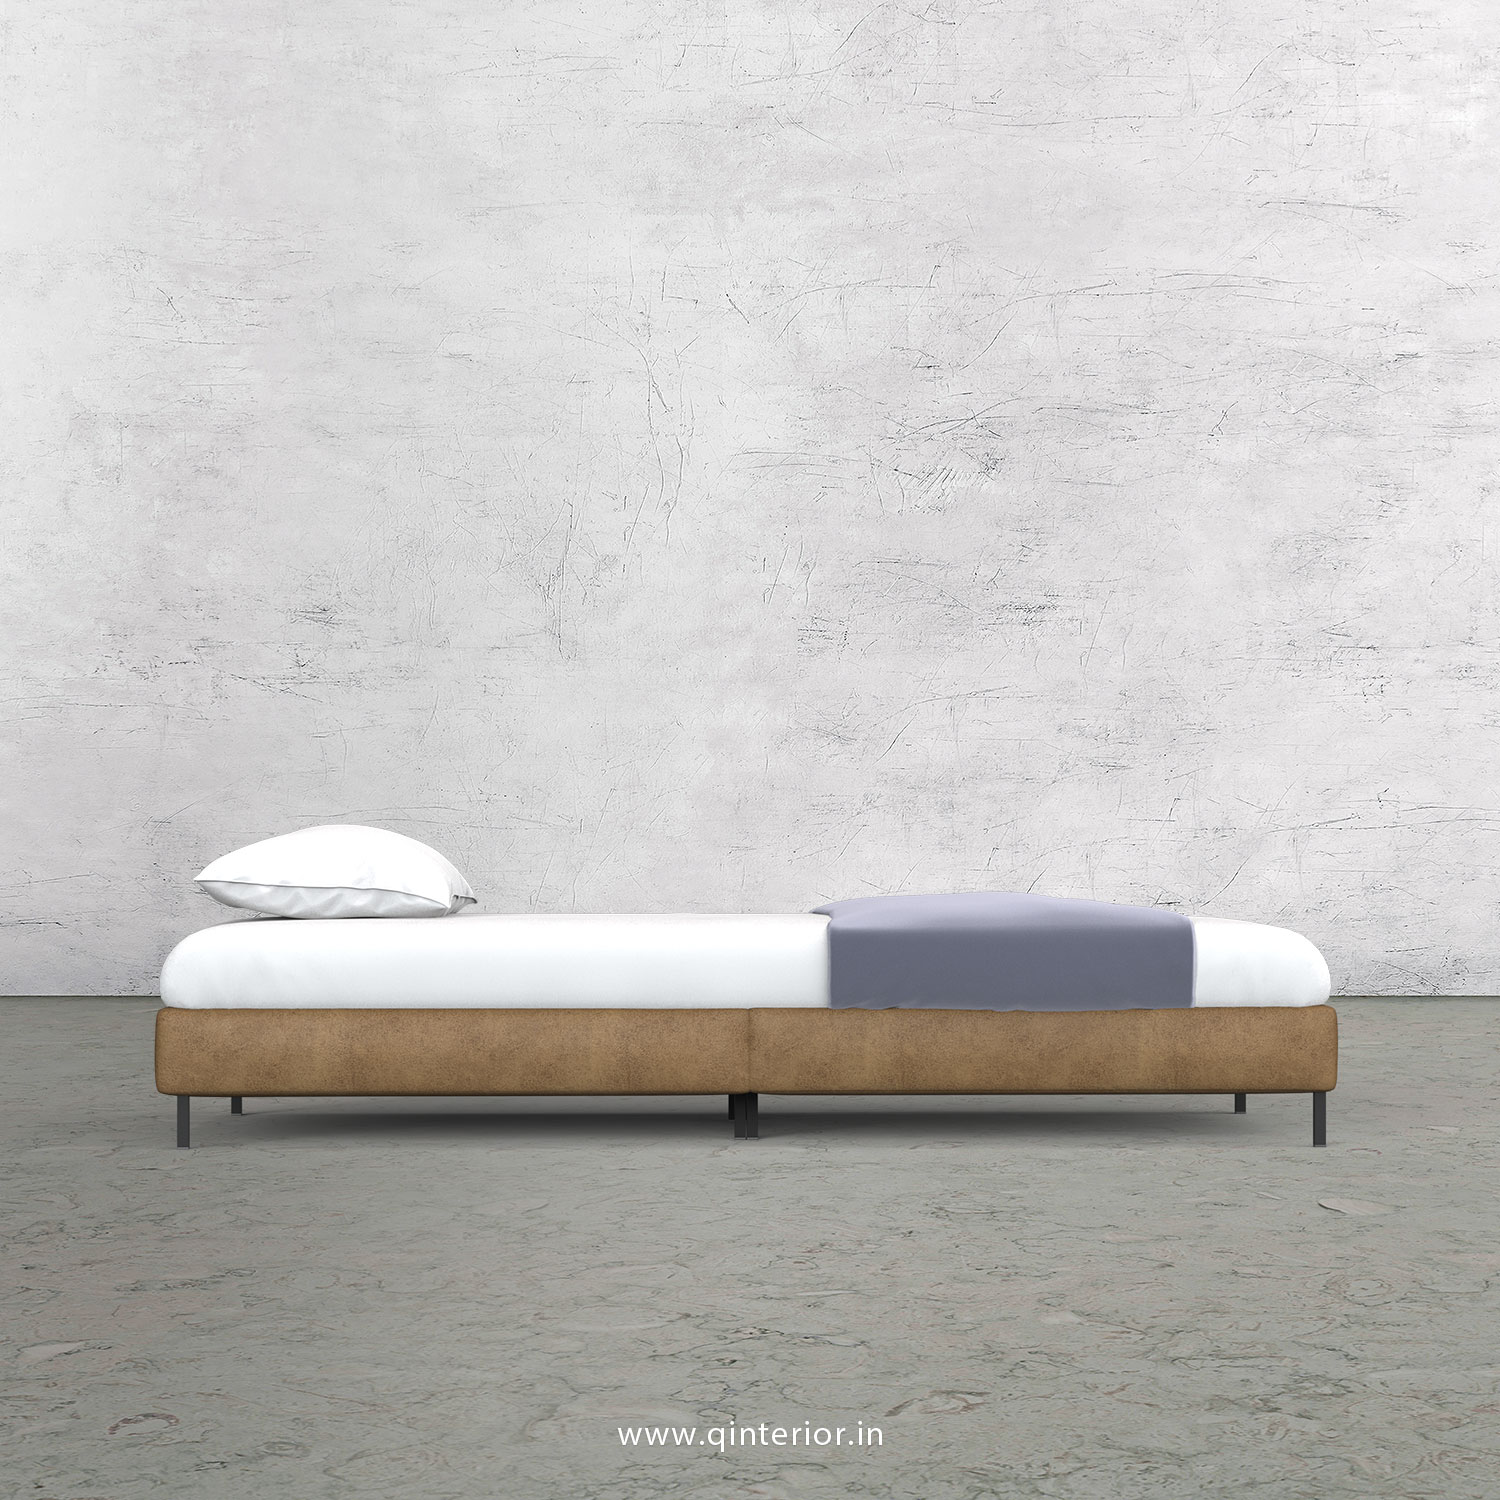 Punto King Sized Bed in Fab Leather Fabric - KBD005 FL02